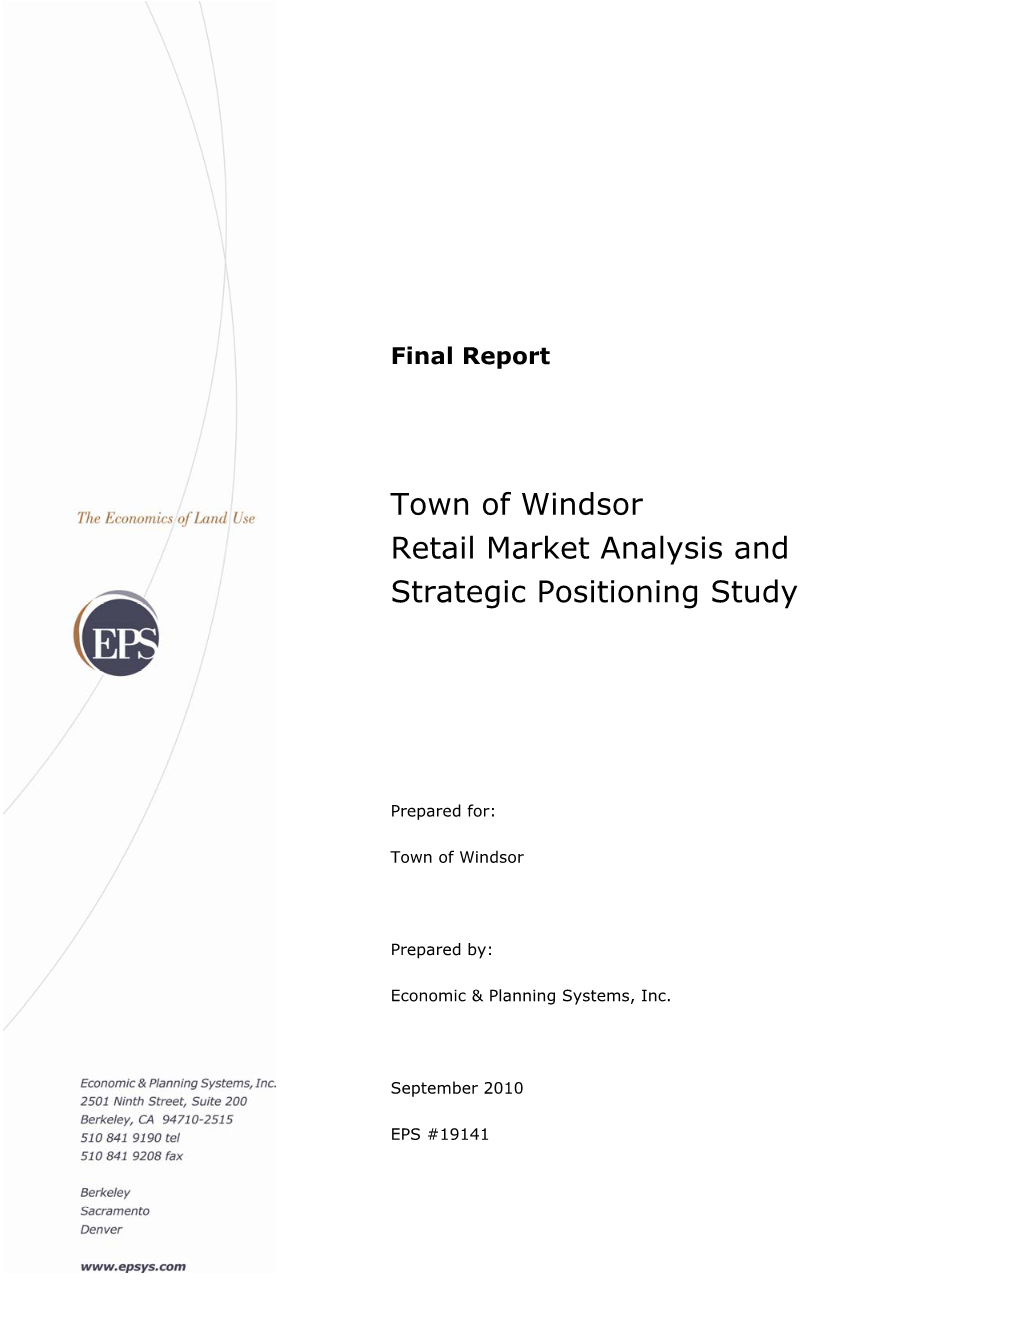 Town of Windsor Retail Market Analysis and Strategic Positioning Study